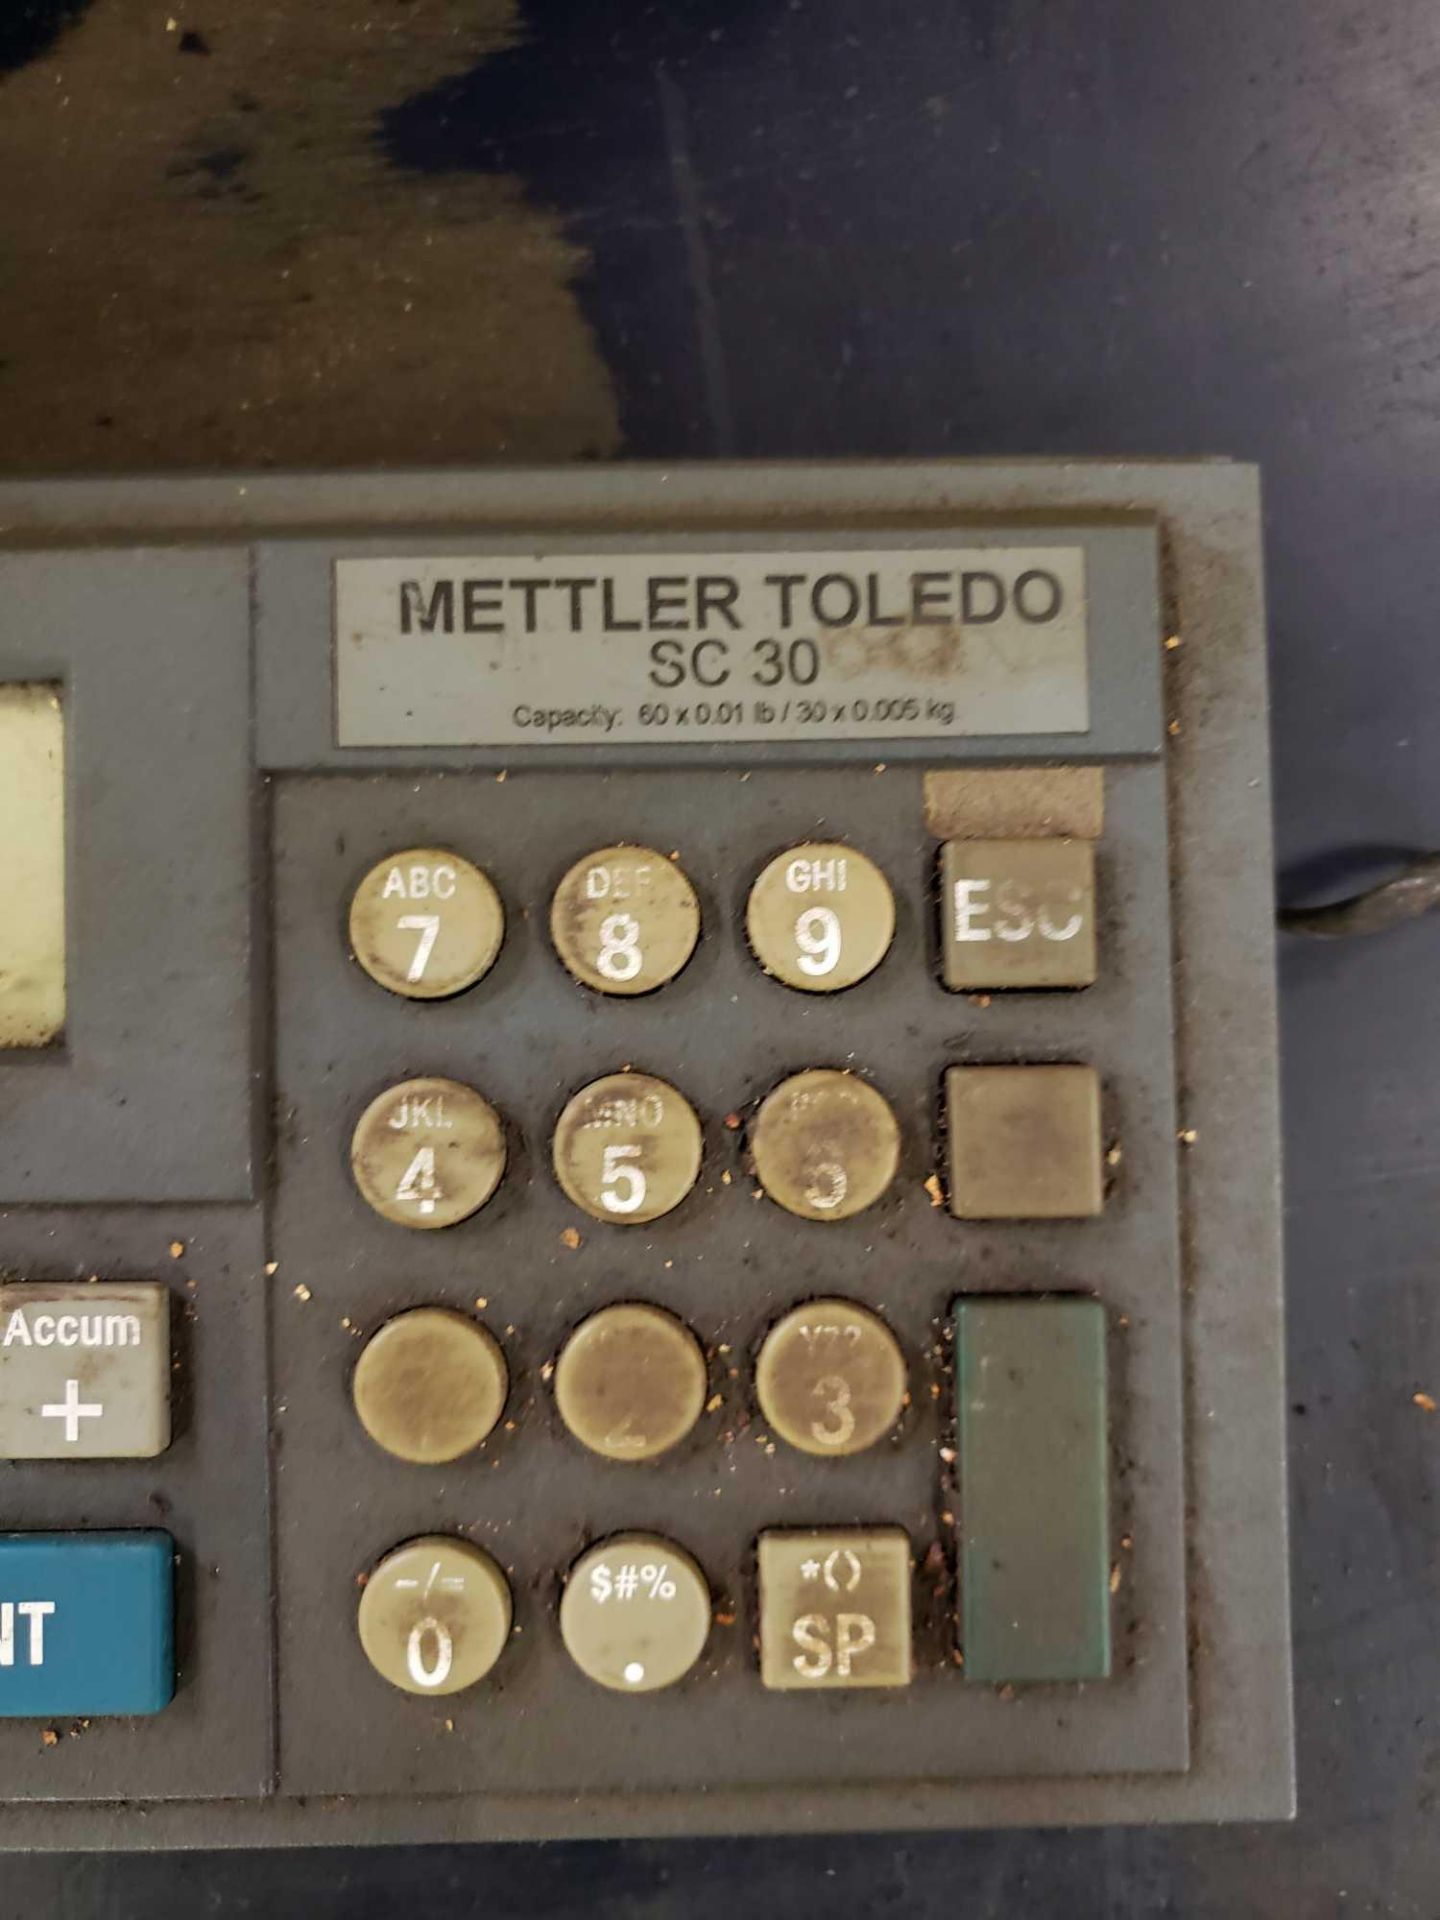 Mettler Toledo Platform shipping scale with tabletop unit included. SC30 digital read out. - Image 2 of 5